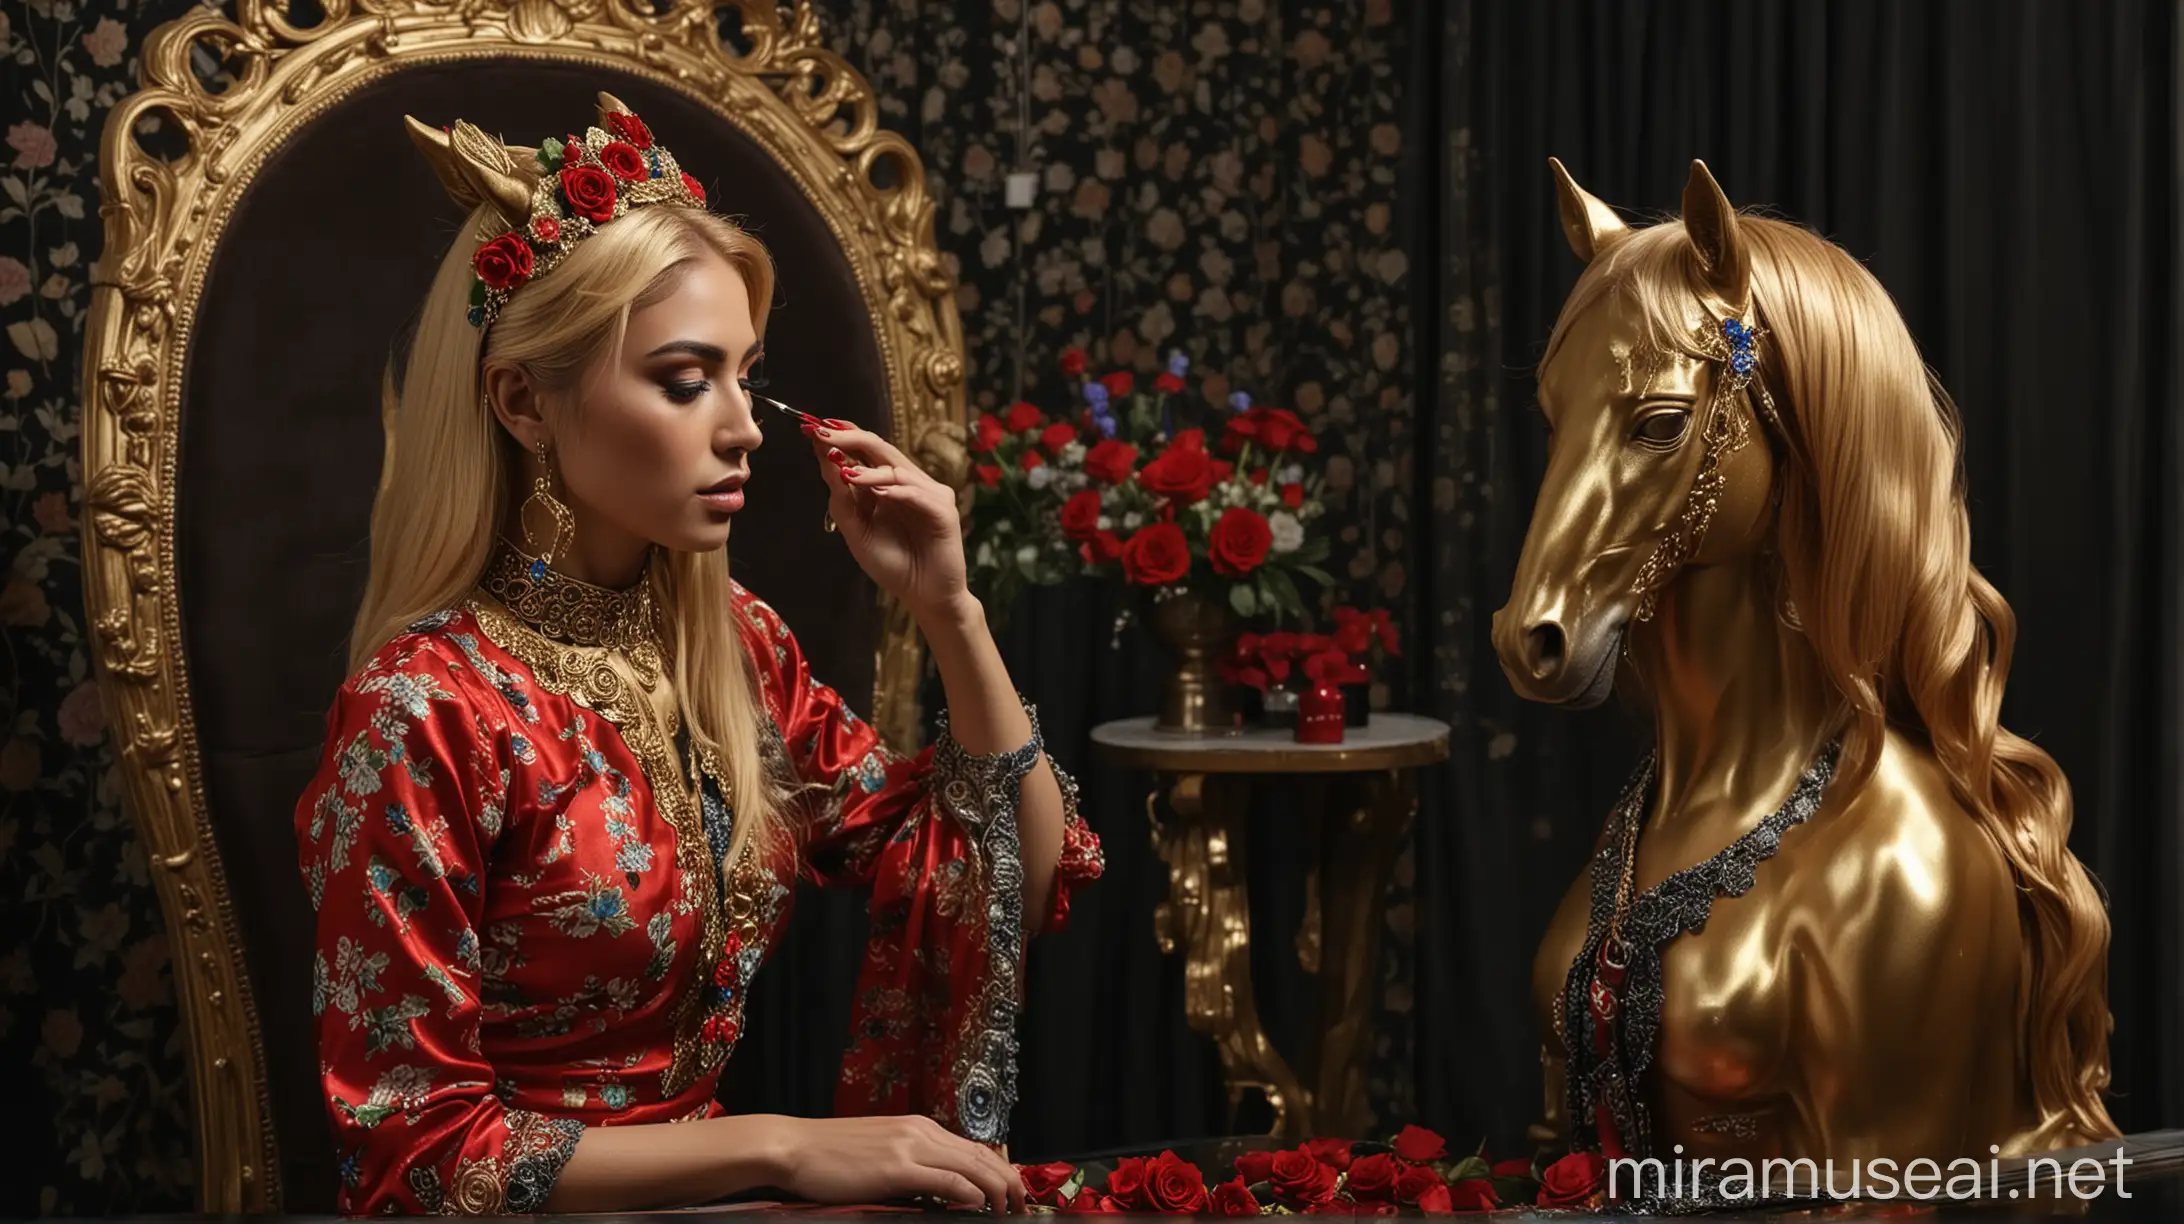 Iranian Woman with Golden Hair Gets Glossy Artificial Highlight at Amadai Salon